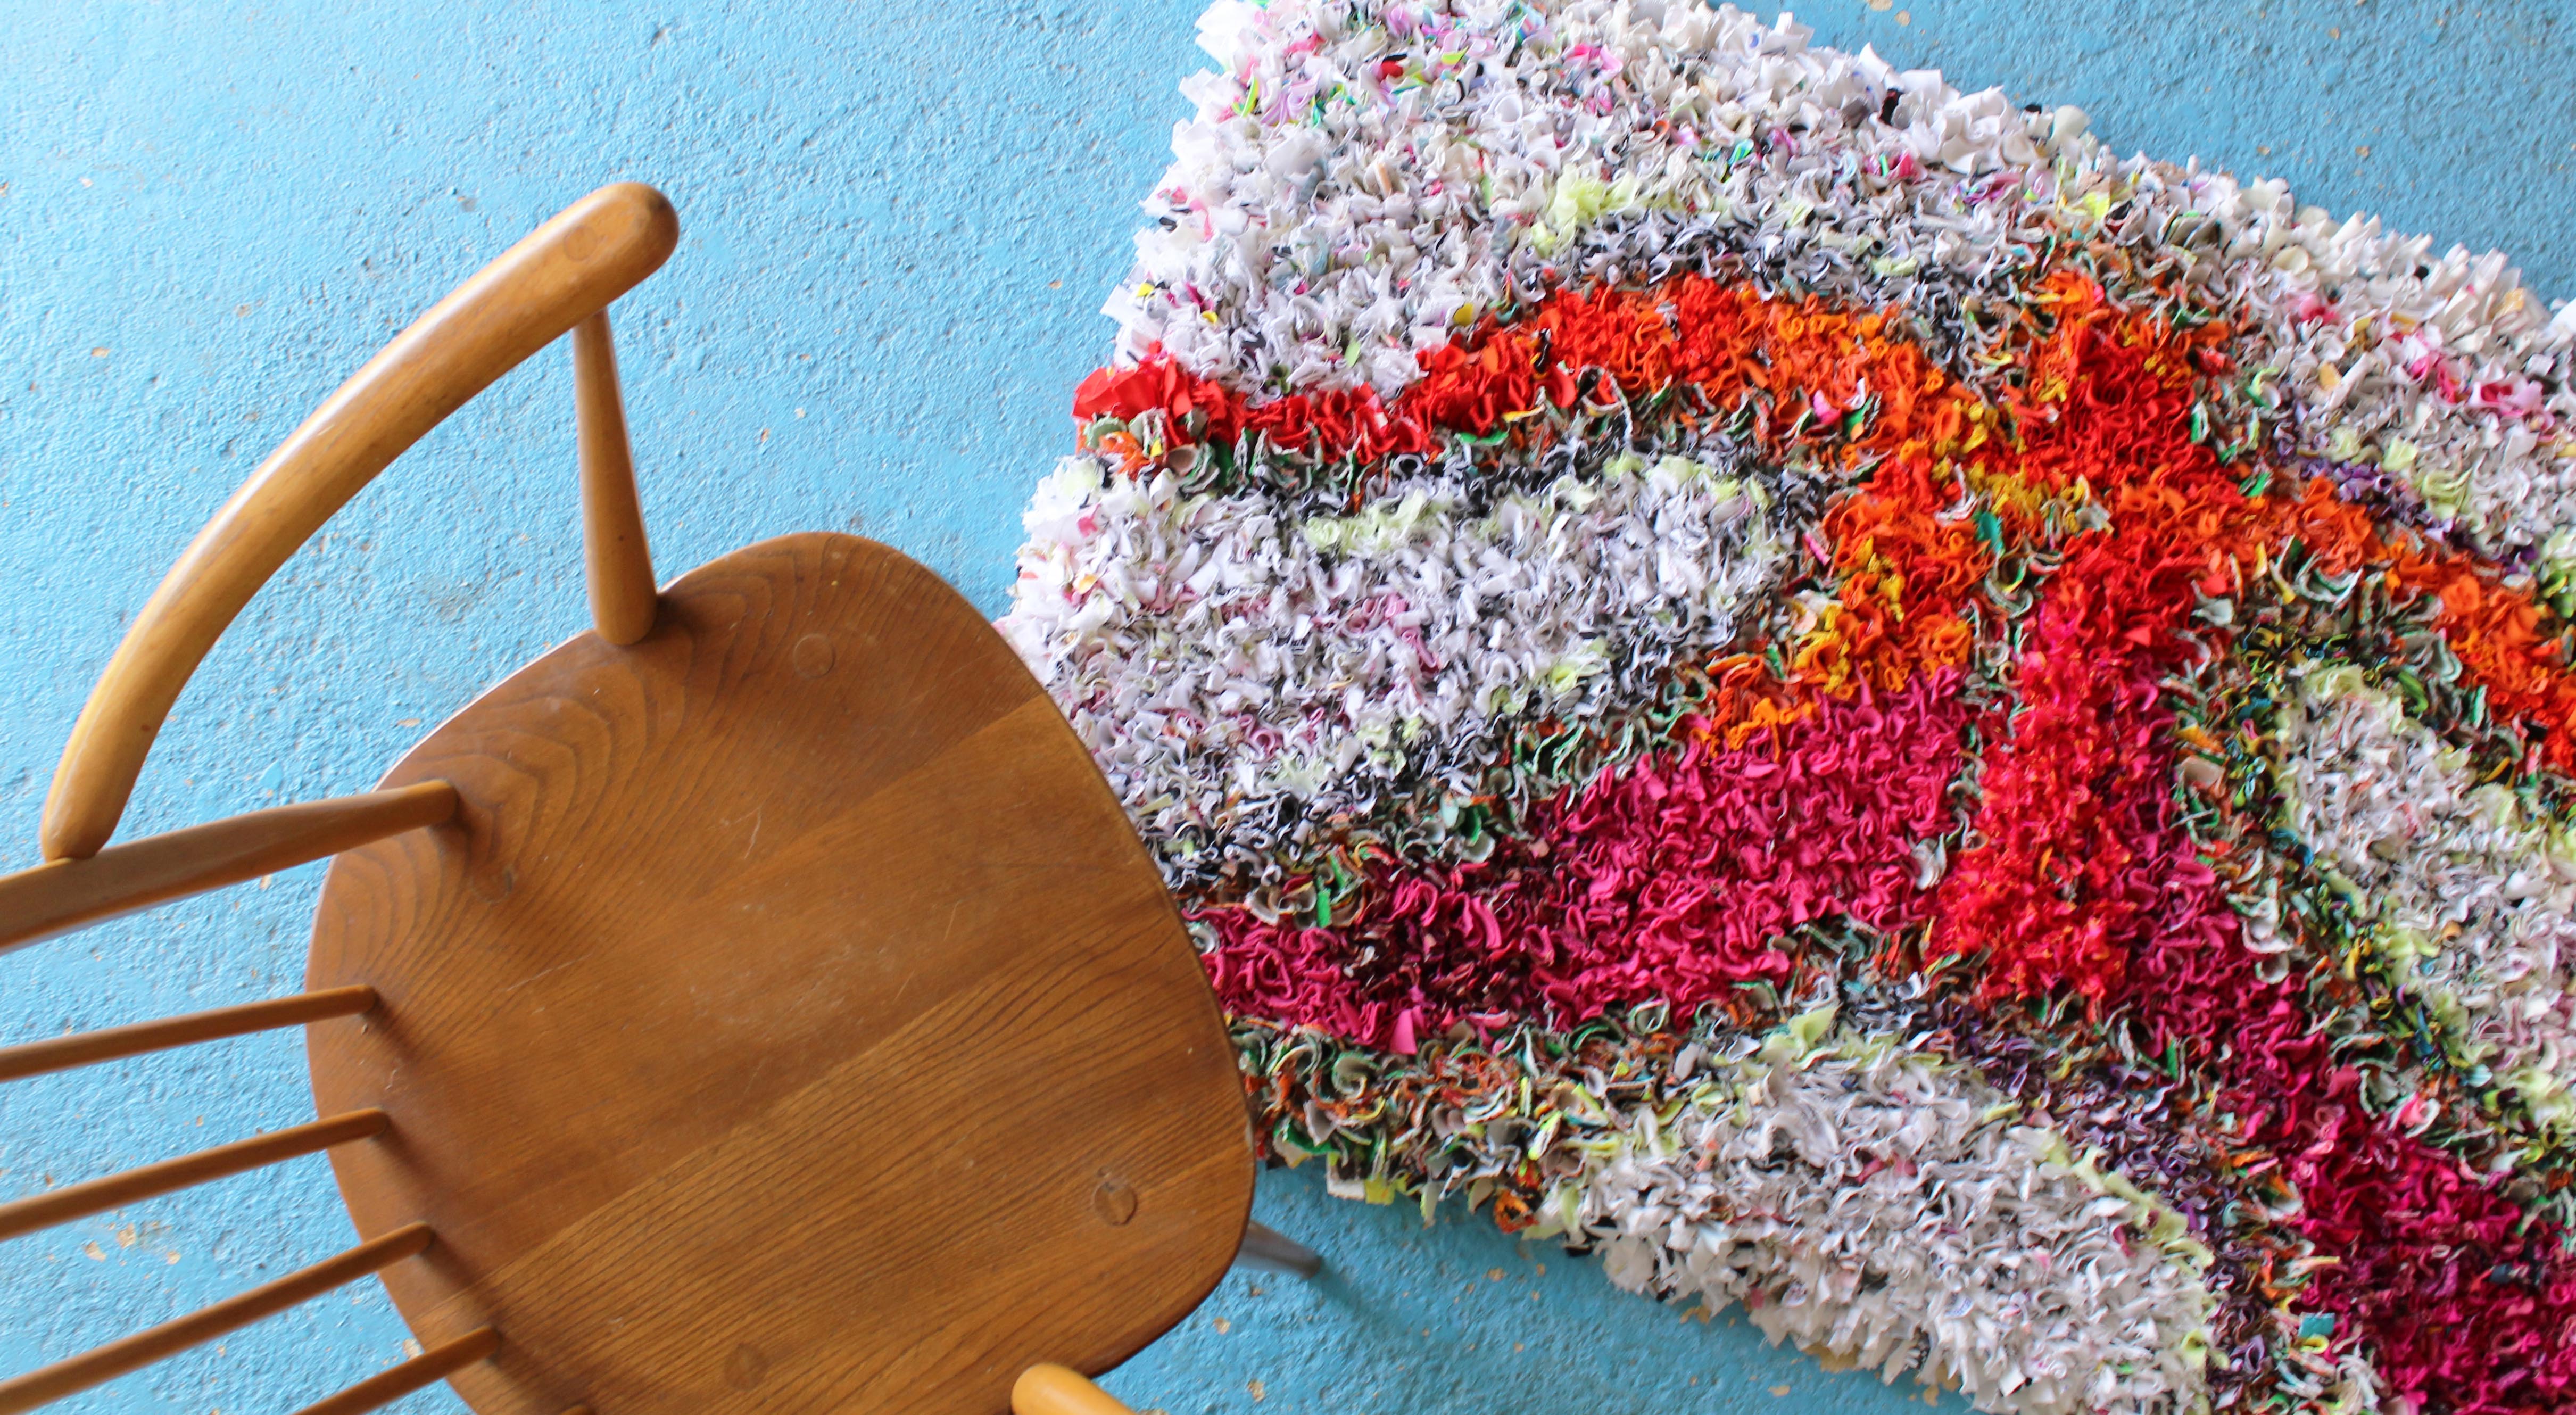 A Ragged Life rag rug on a blue floor with a wooden Ercol chair